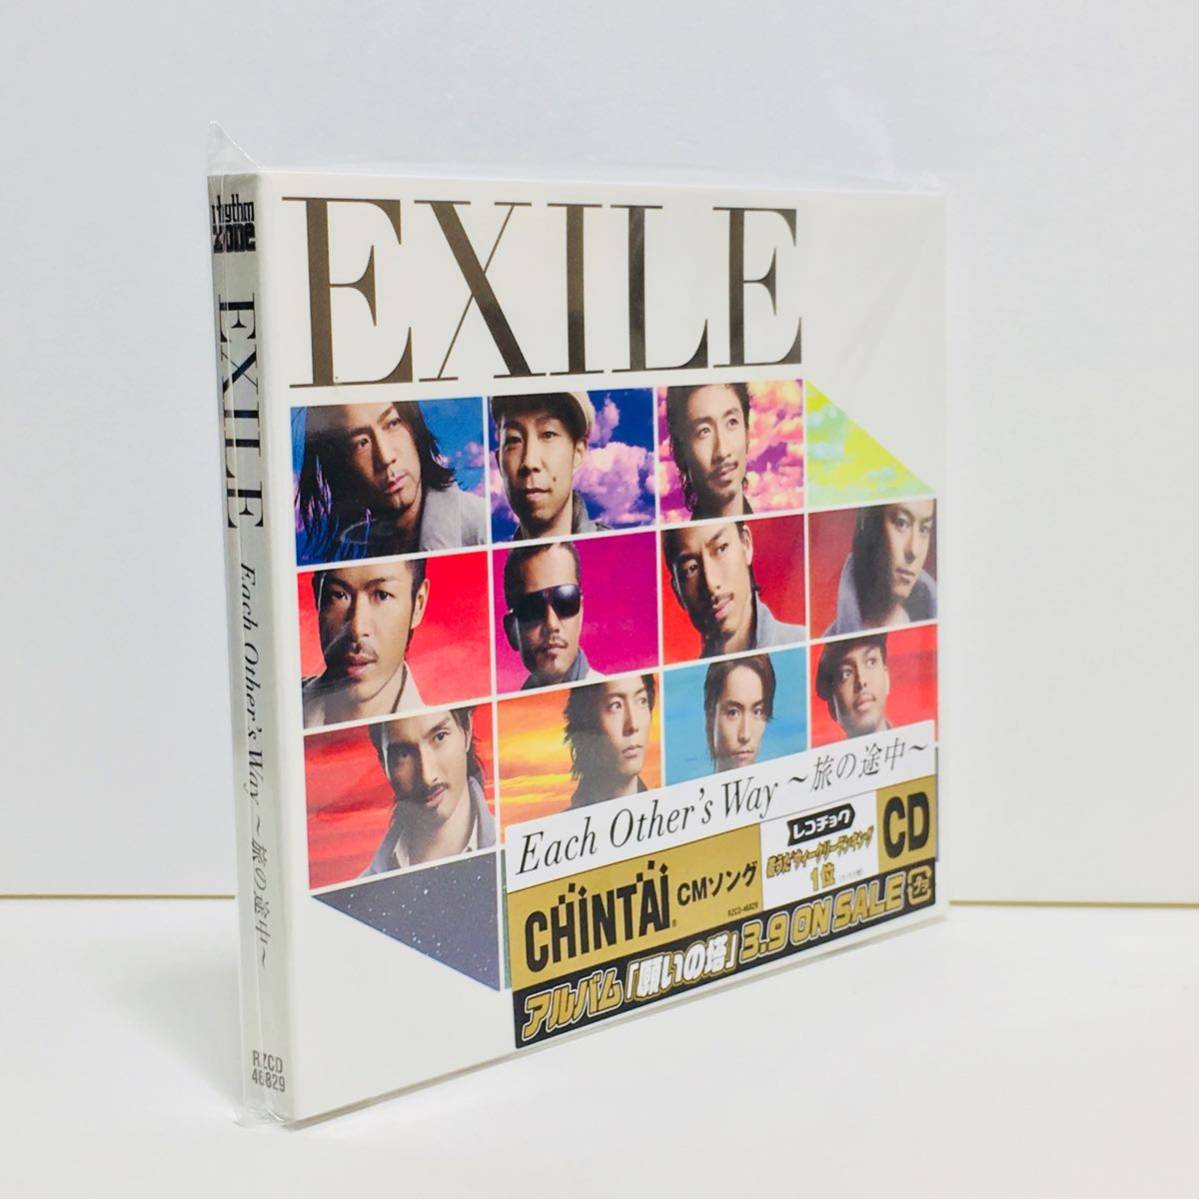 g1/在庫整理品!未開封!新品! /EXILE /Each Other’s Way ~旅の途中~ /ゆうメール送料180円_画像3